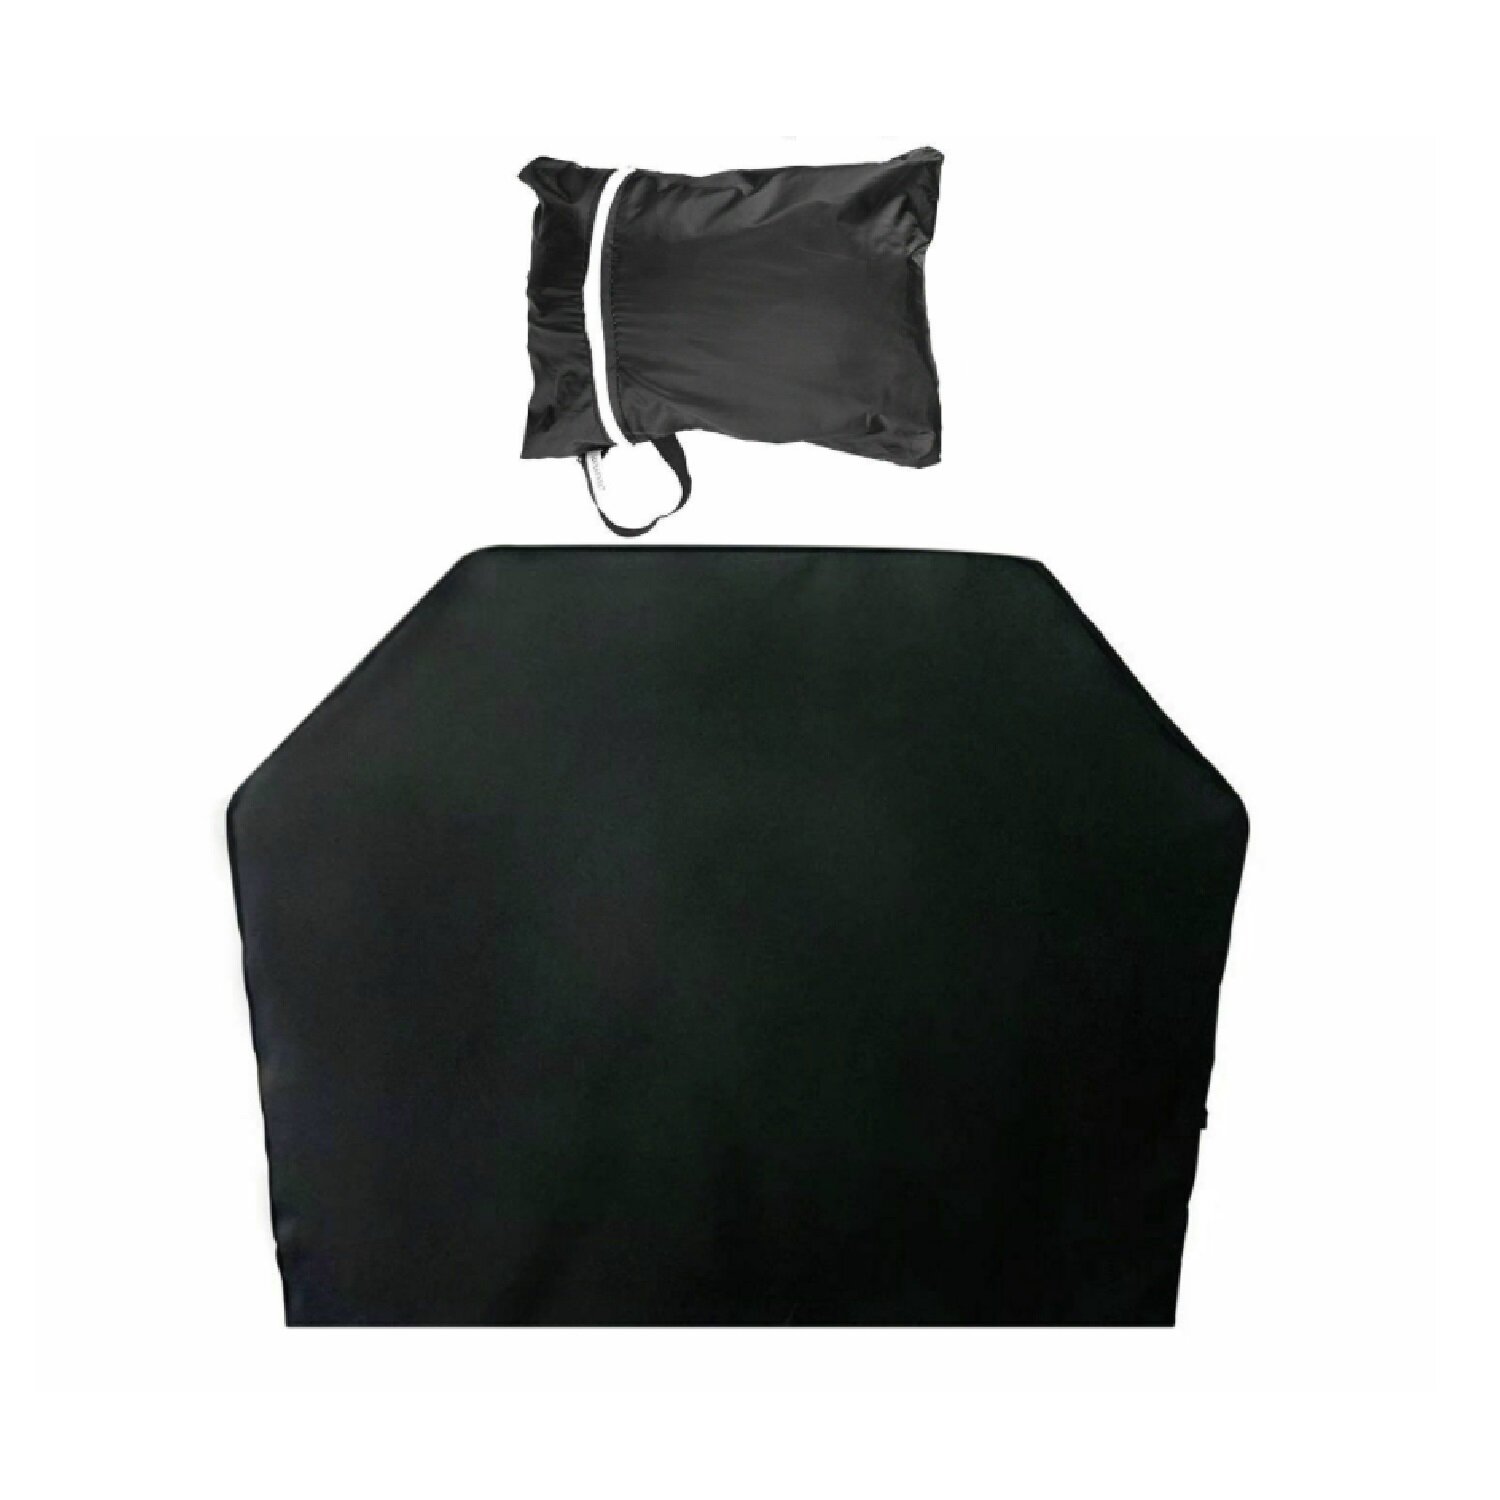 BBQ Gas Grill Cover Gas Barbecue Waterproof Outdoor Heavy Duty Protection US 